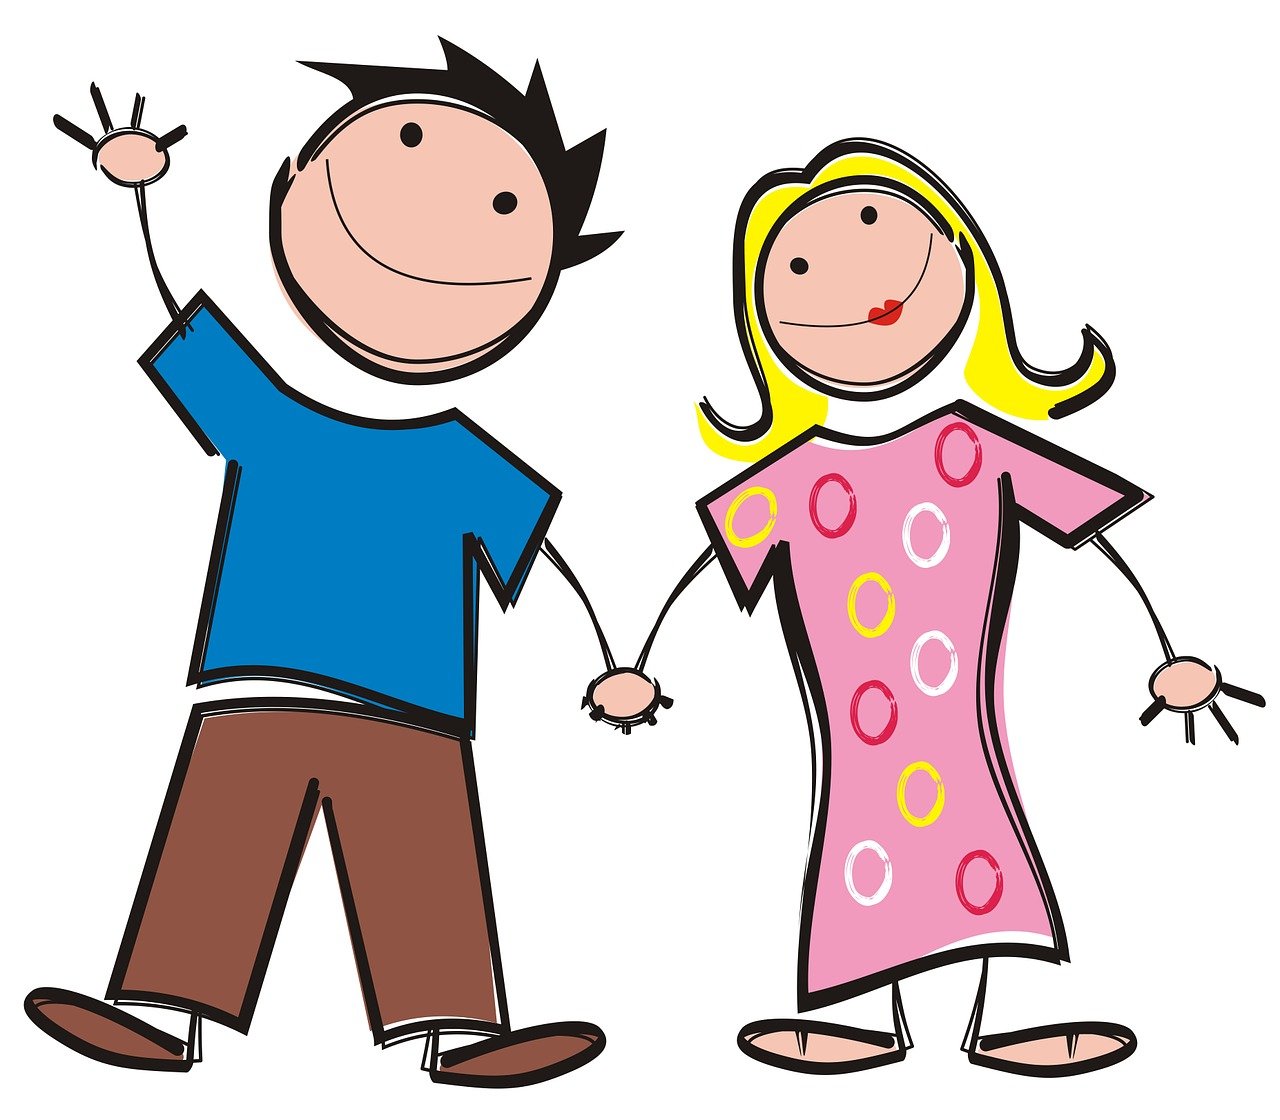 a drawing of a boy and a girl holding hands, a cartoon, posed, happy smiling, exciting illustration, long arm